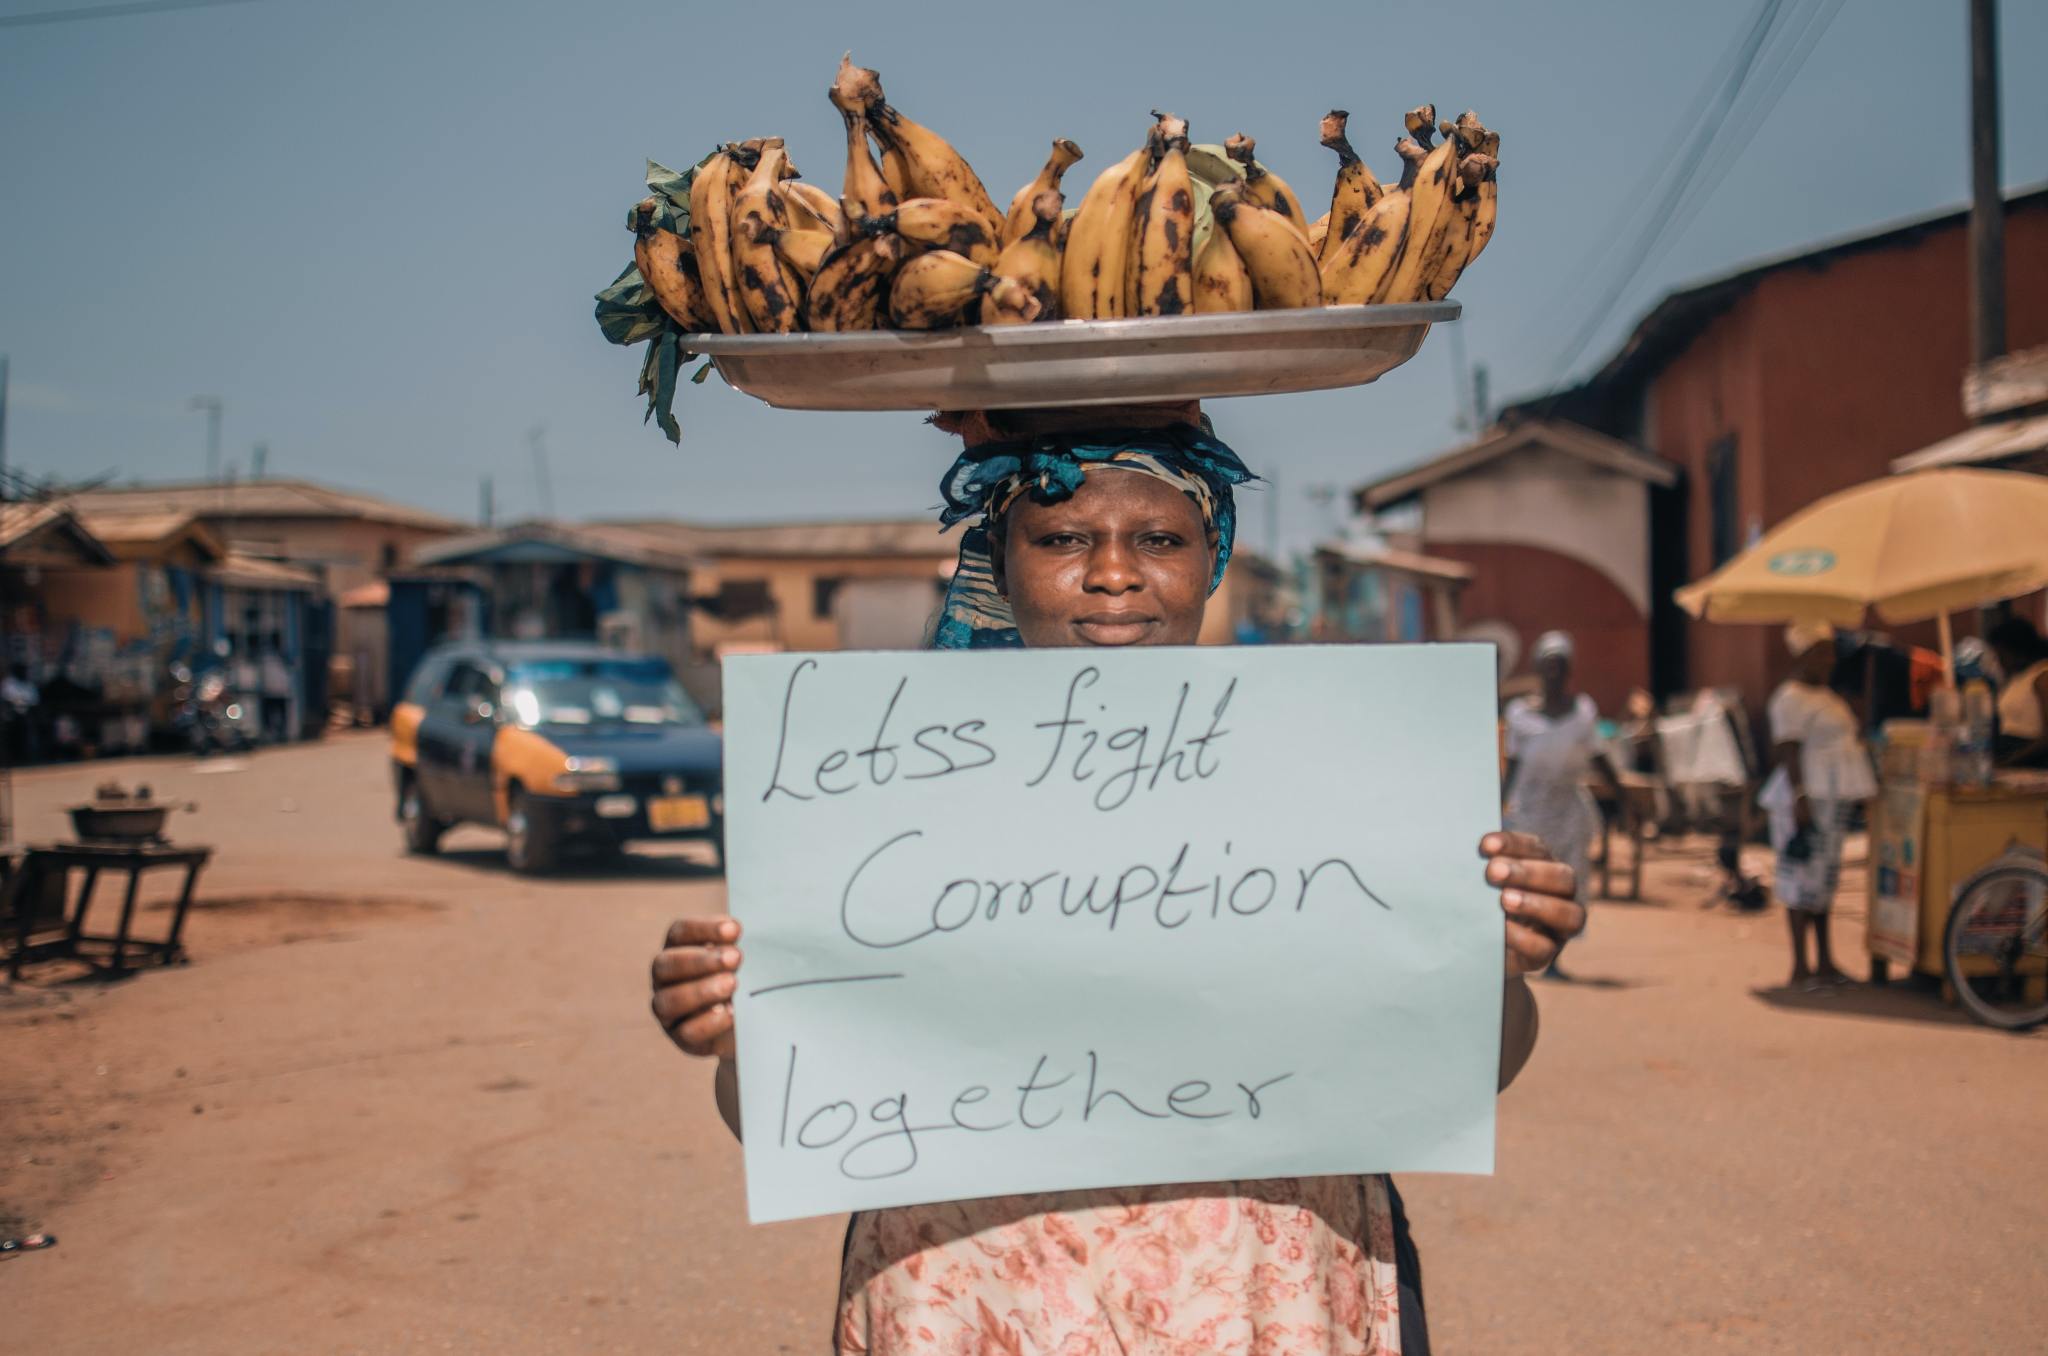 A woman balances bananas on her head and holds up a sign in favor of fighting corruption